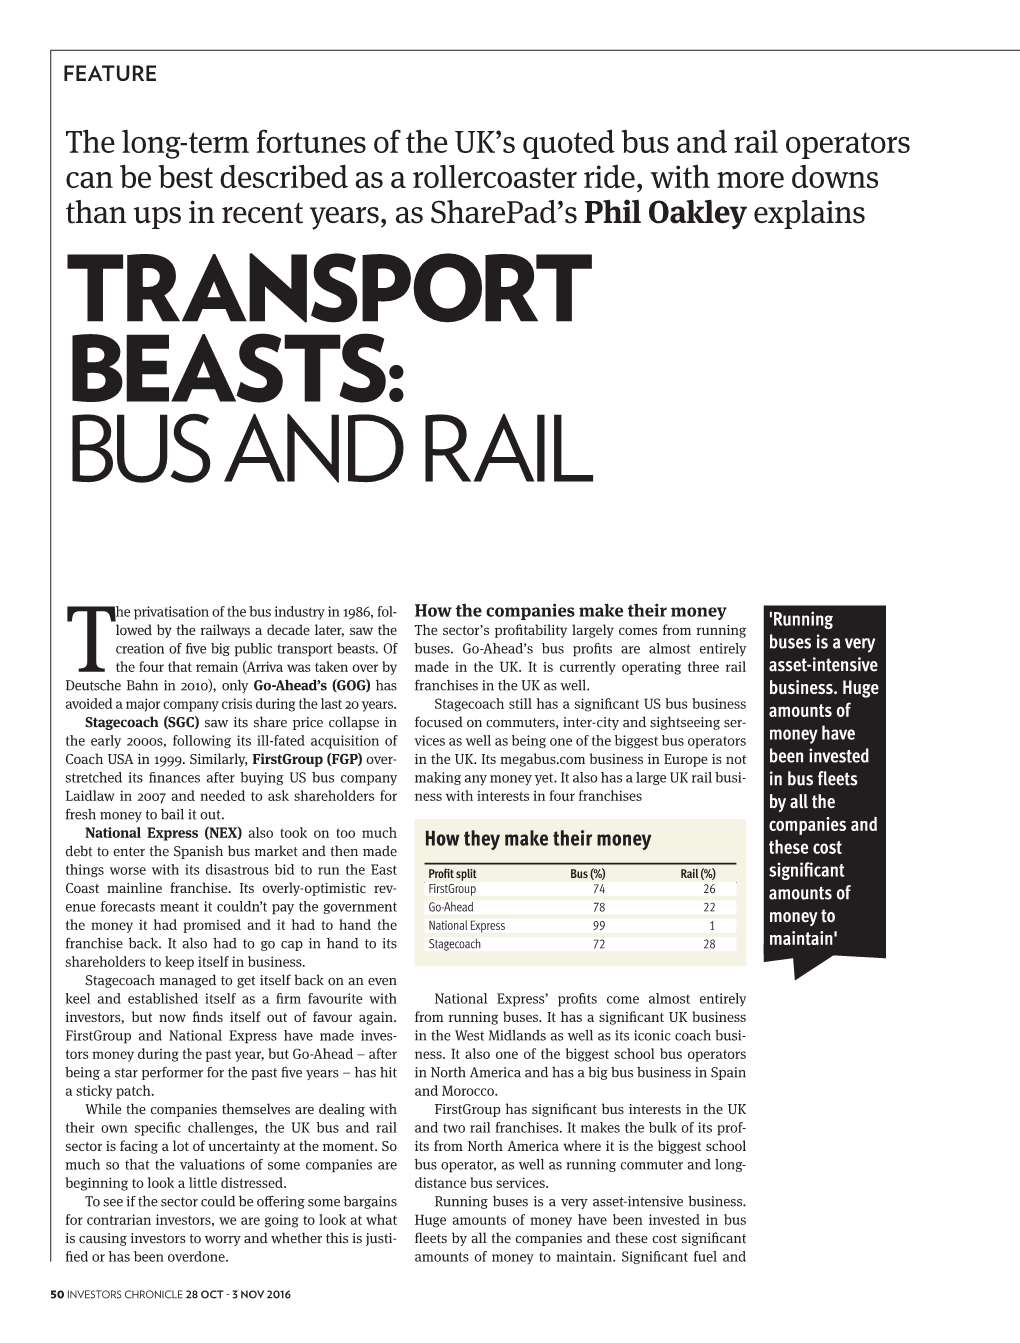 Transport Beasts: Bus and Rail